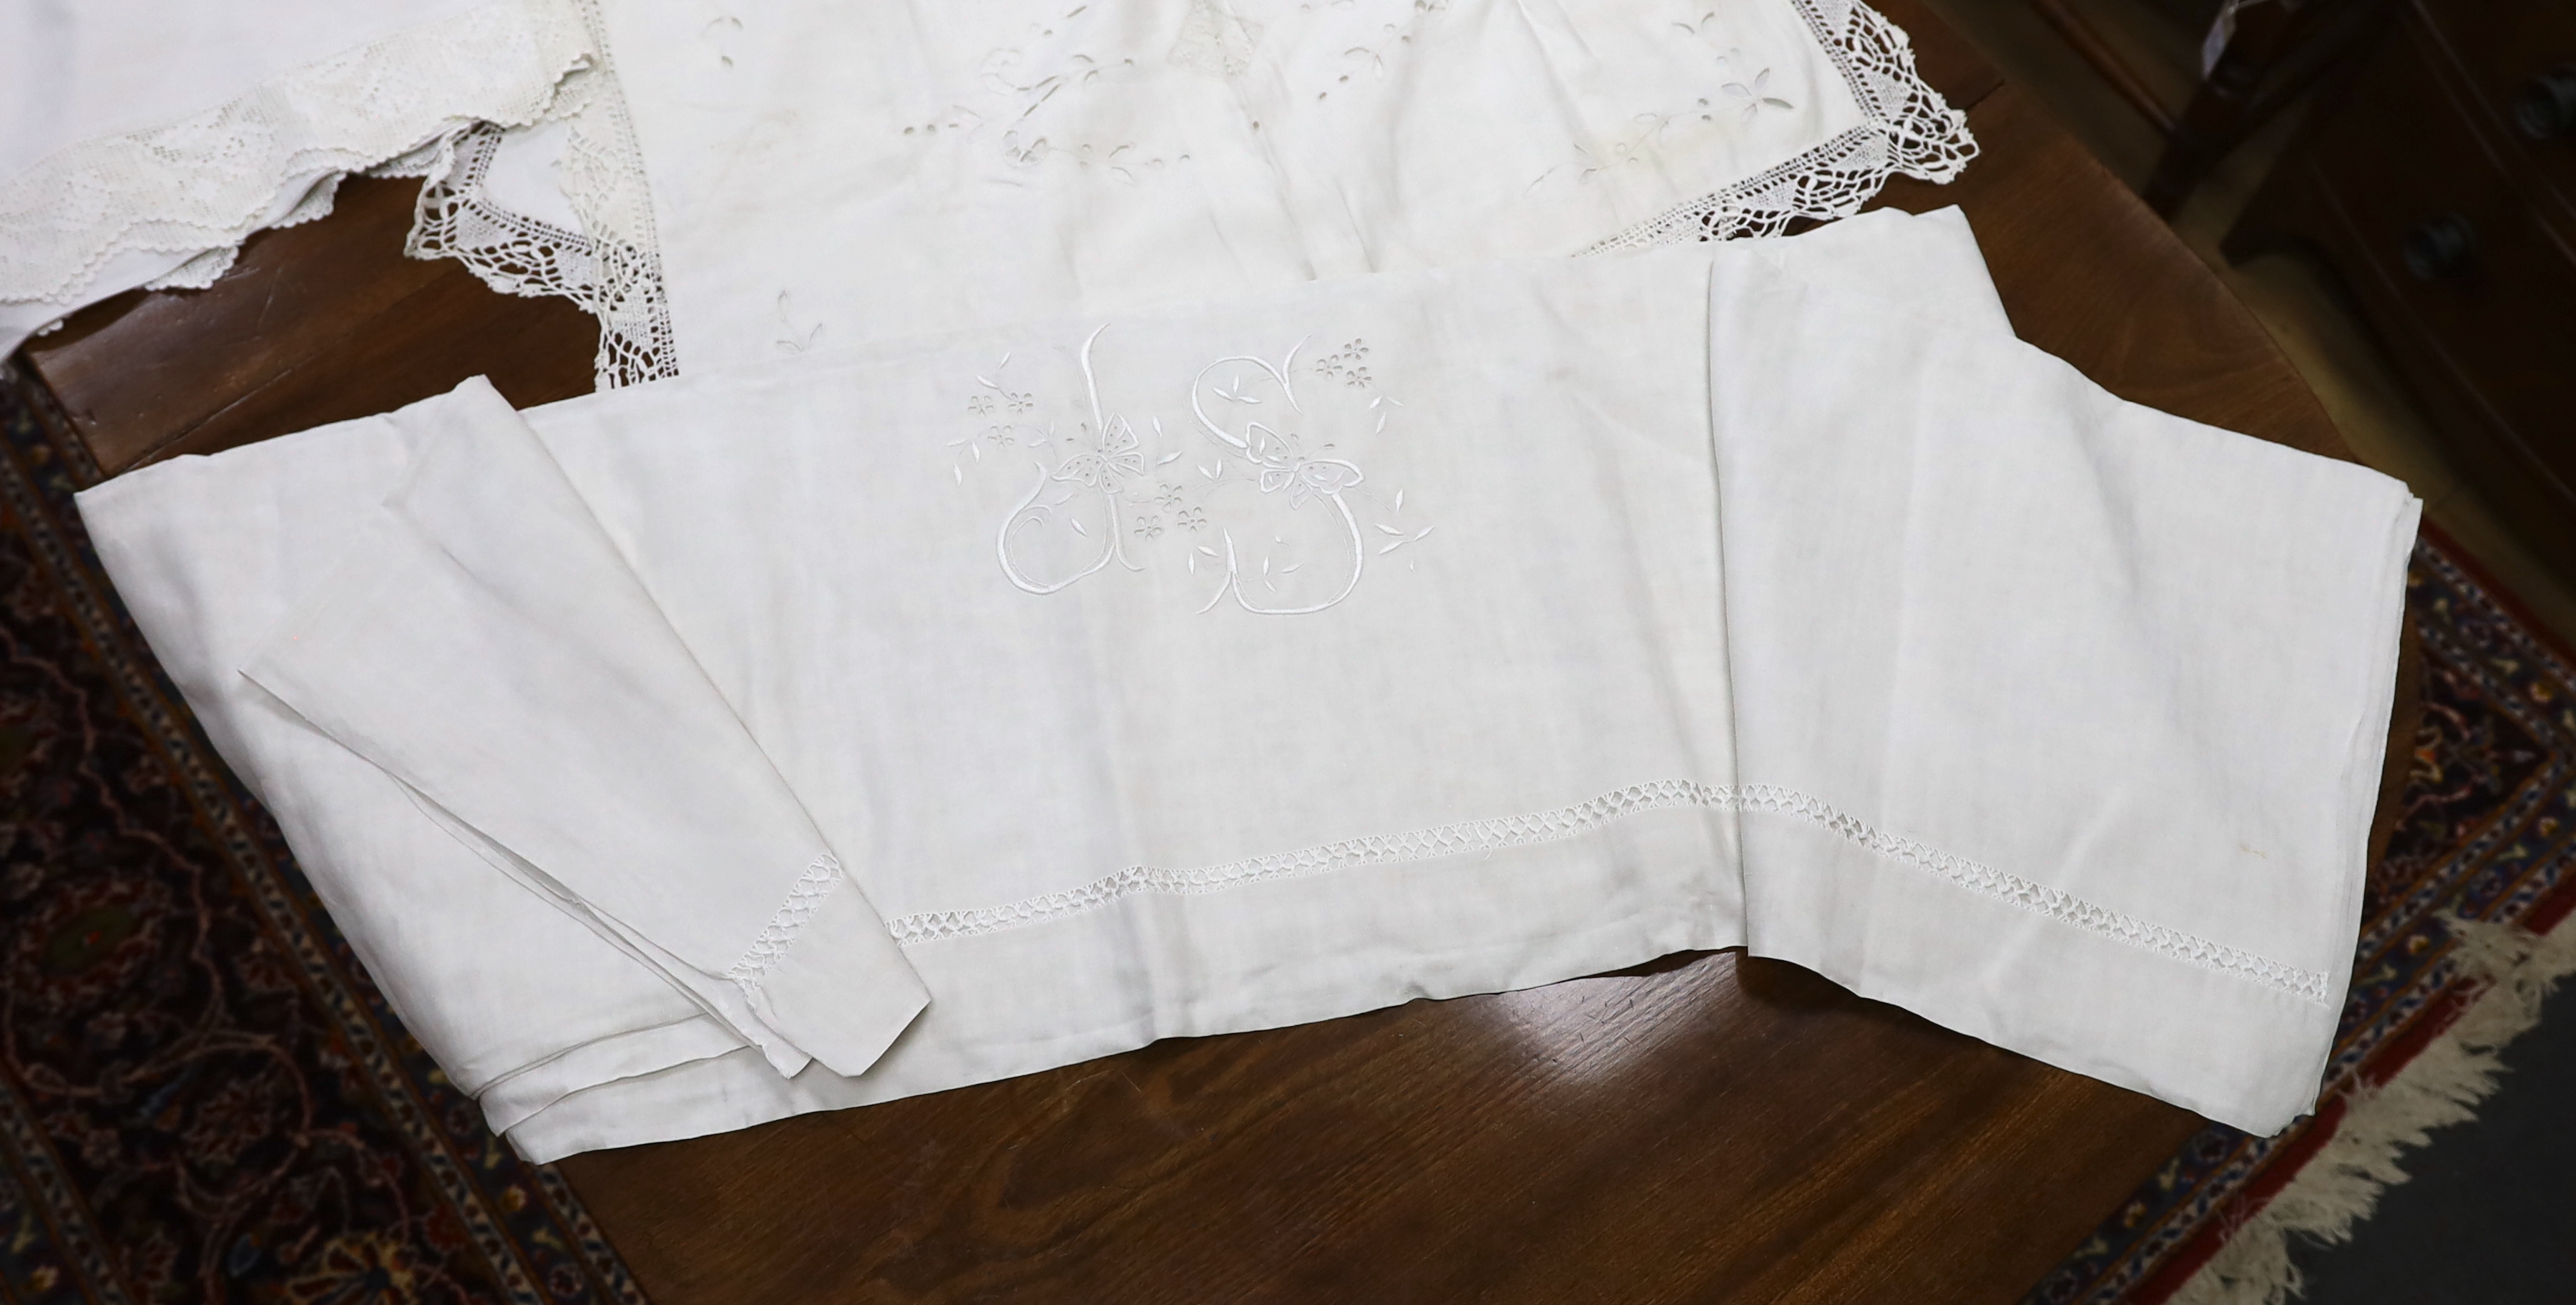 19th-20th century bed linen; a monogrammed sheet, 7ft 6in., and a smaller crochet edged sheet, a pair of French square Anglaise pillow cases, three similar appliqué pillow cases, a frilled single square pillow case and a